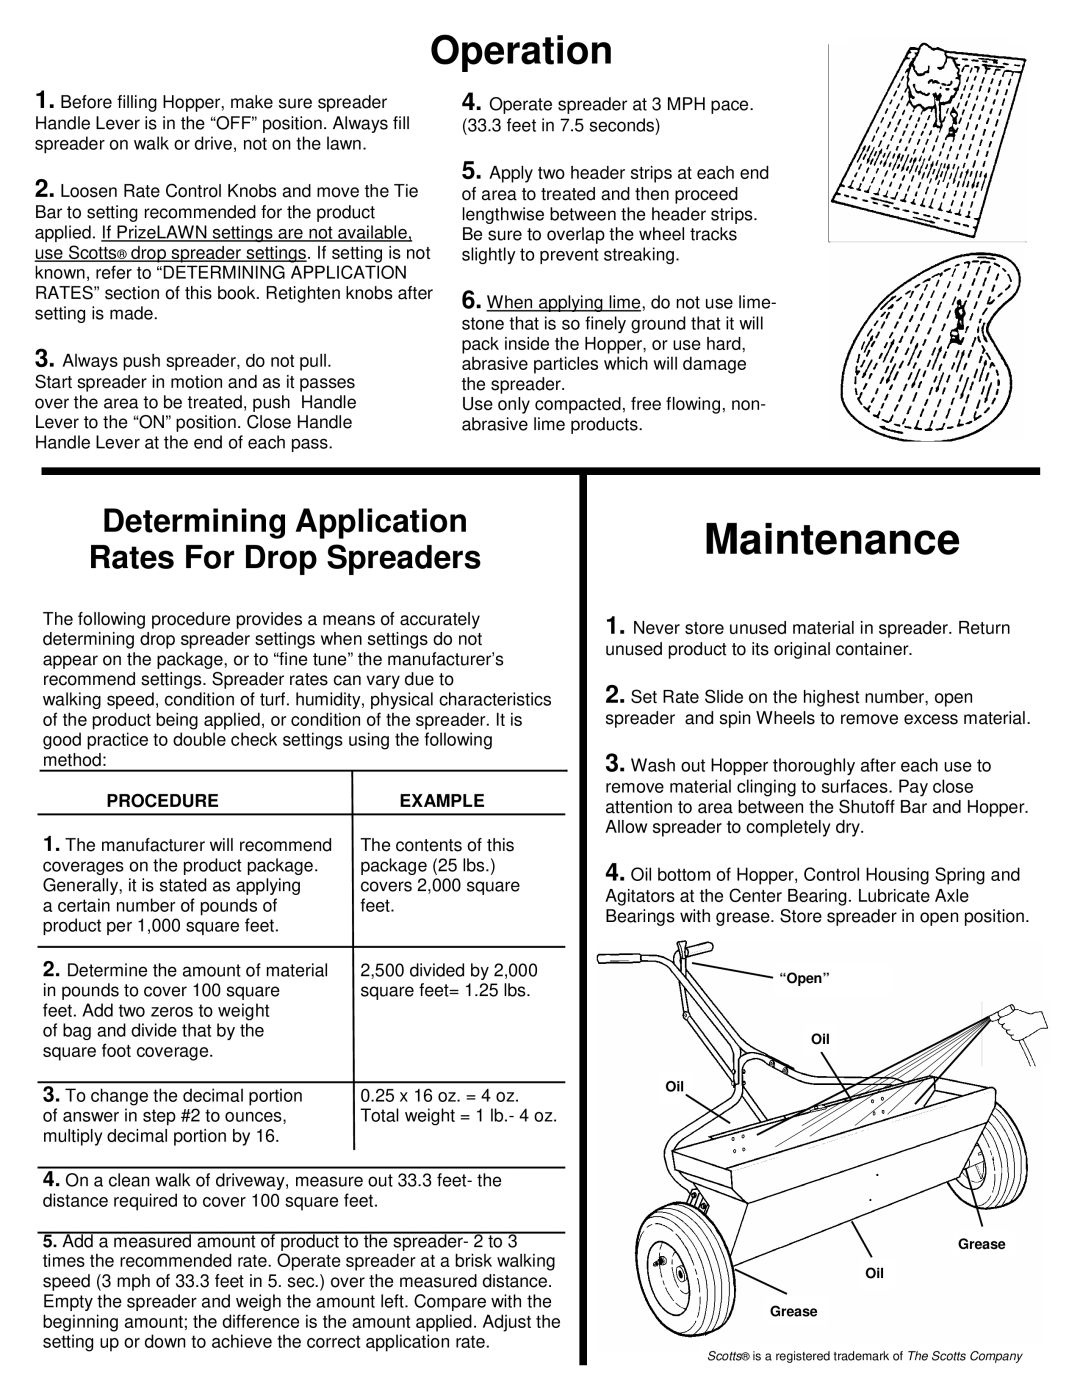 Scotts CD36C owner manual Maintenance, Operation, Determining Application Rates For Drop Spreaders, Procedure 